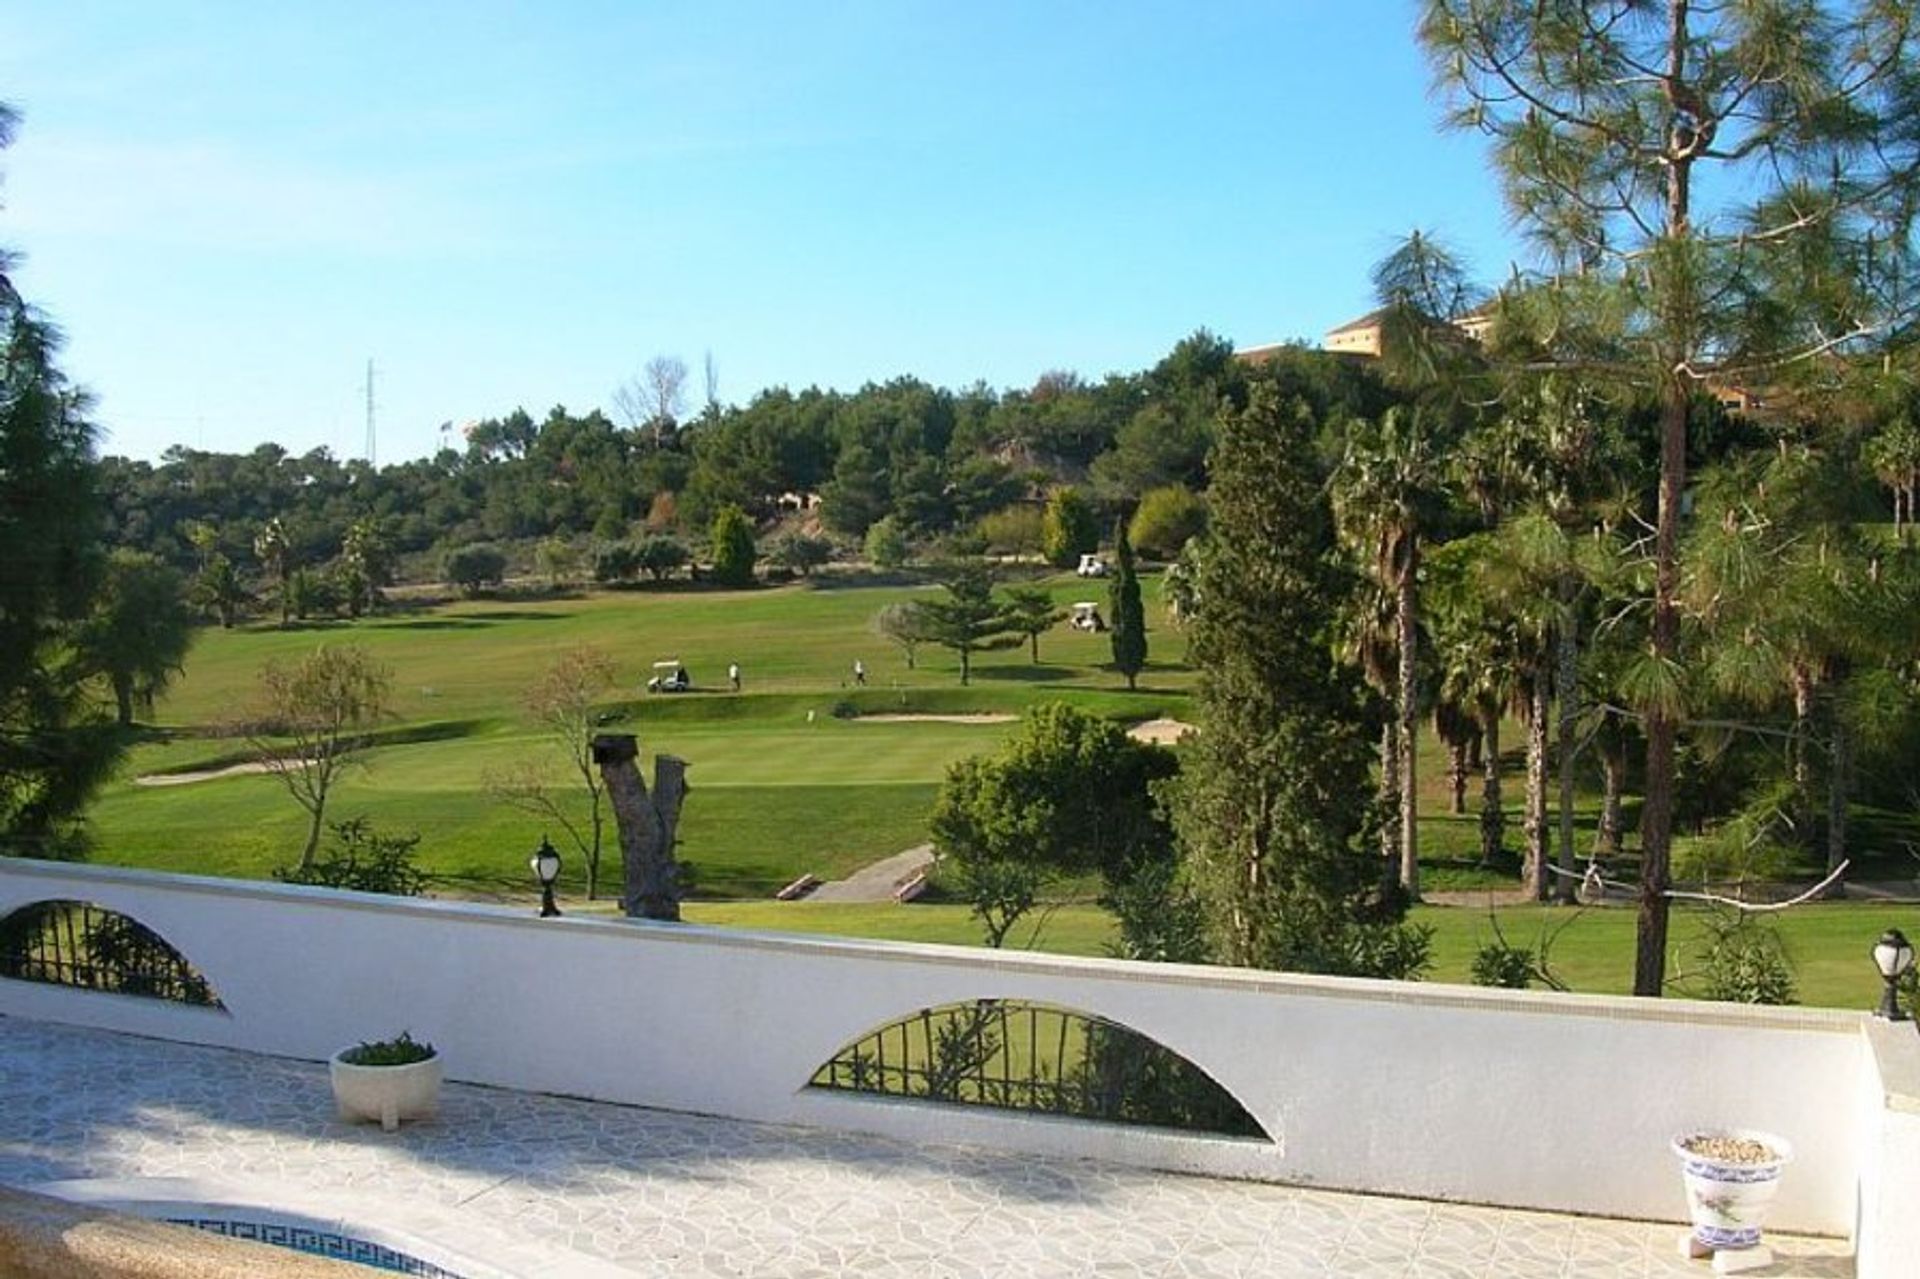 Practice your swing at one of many world-class golf courses within easy reach of the resort